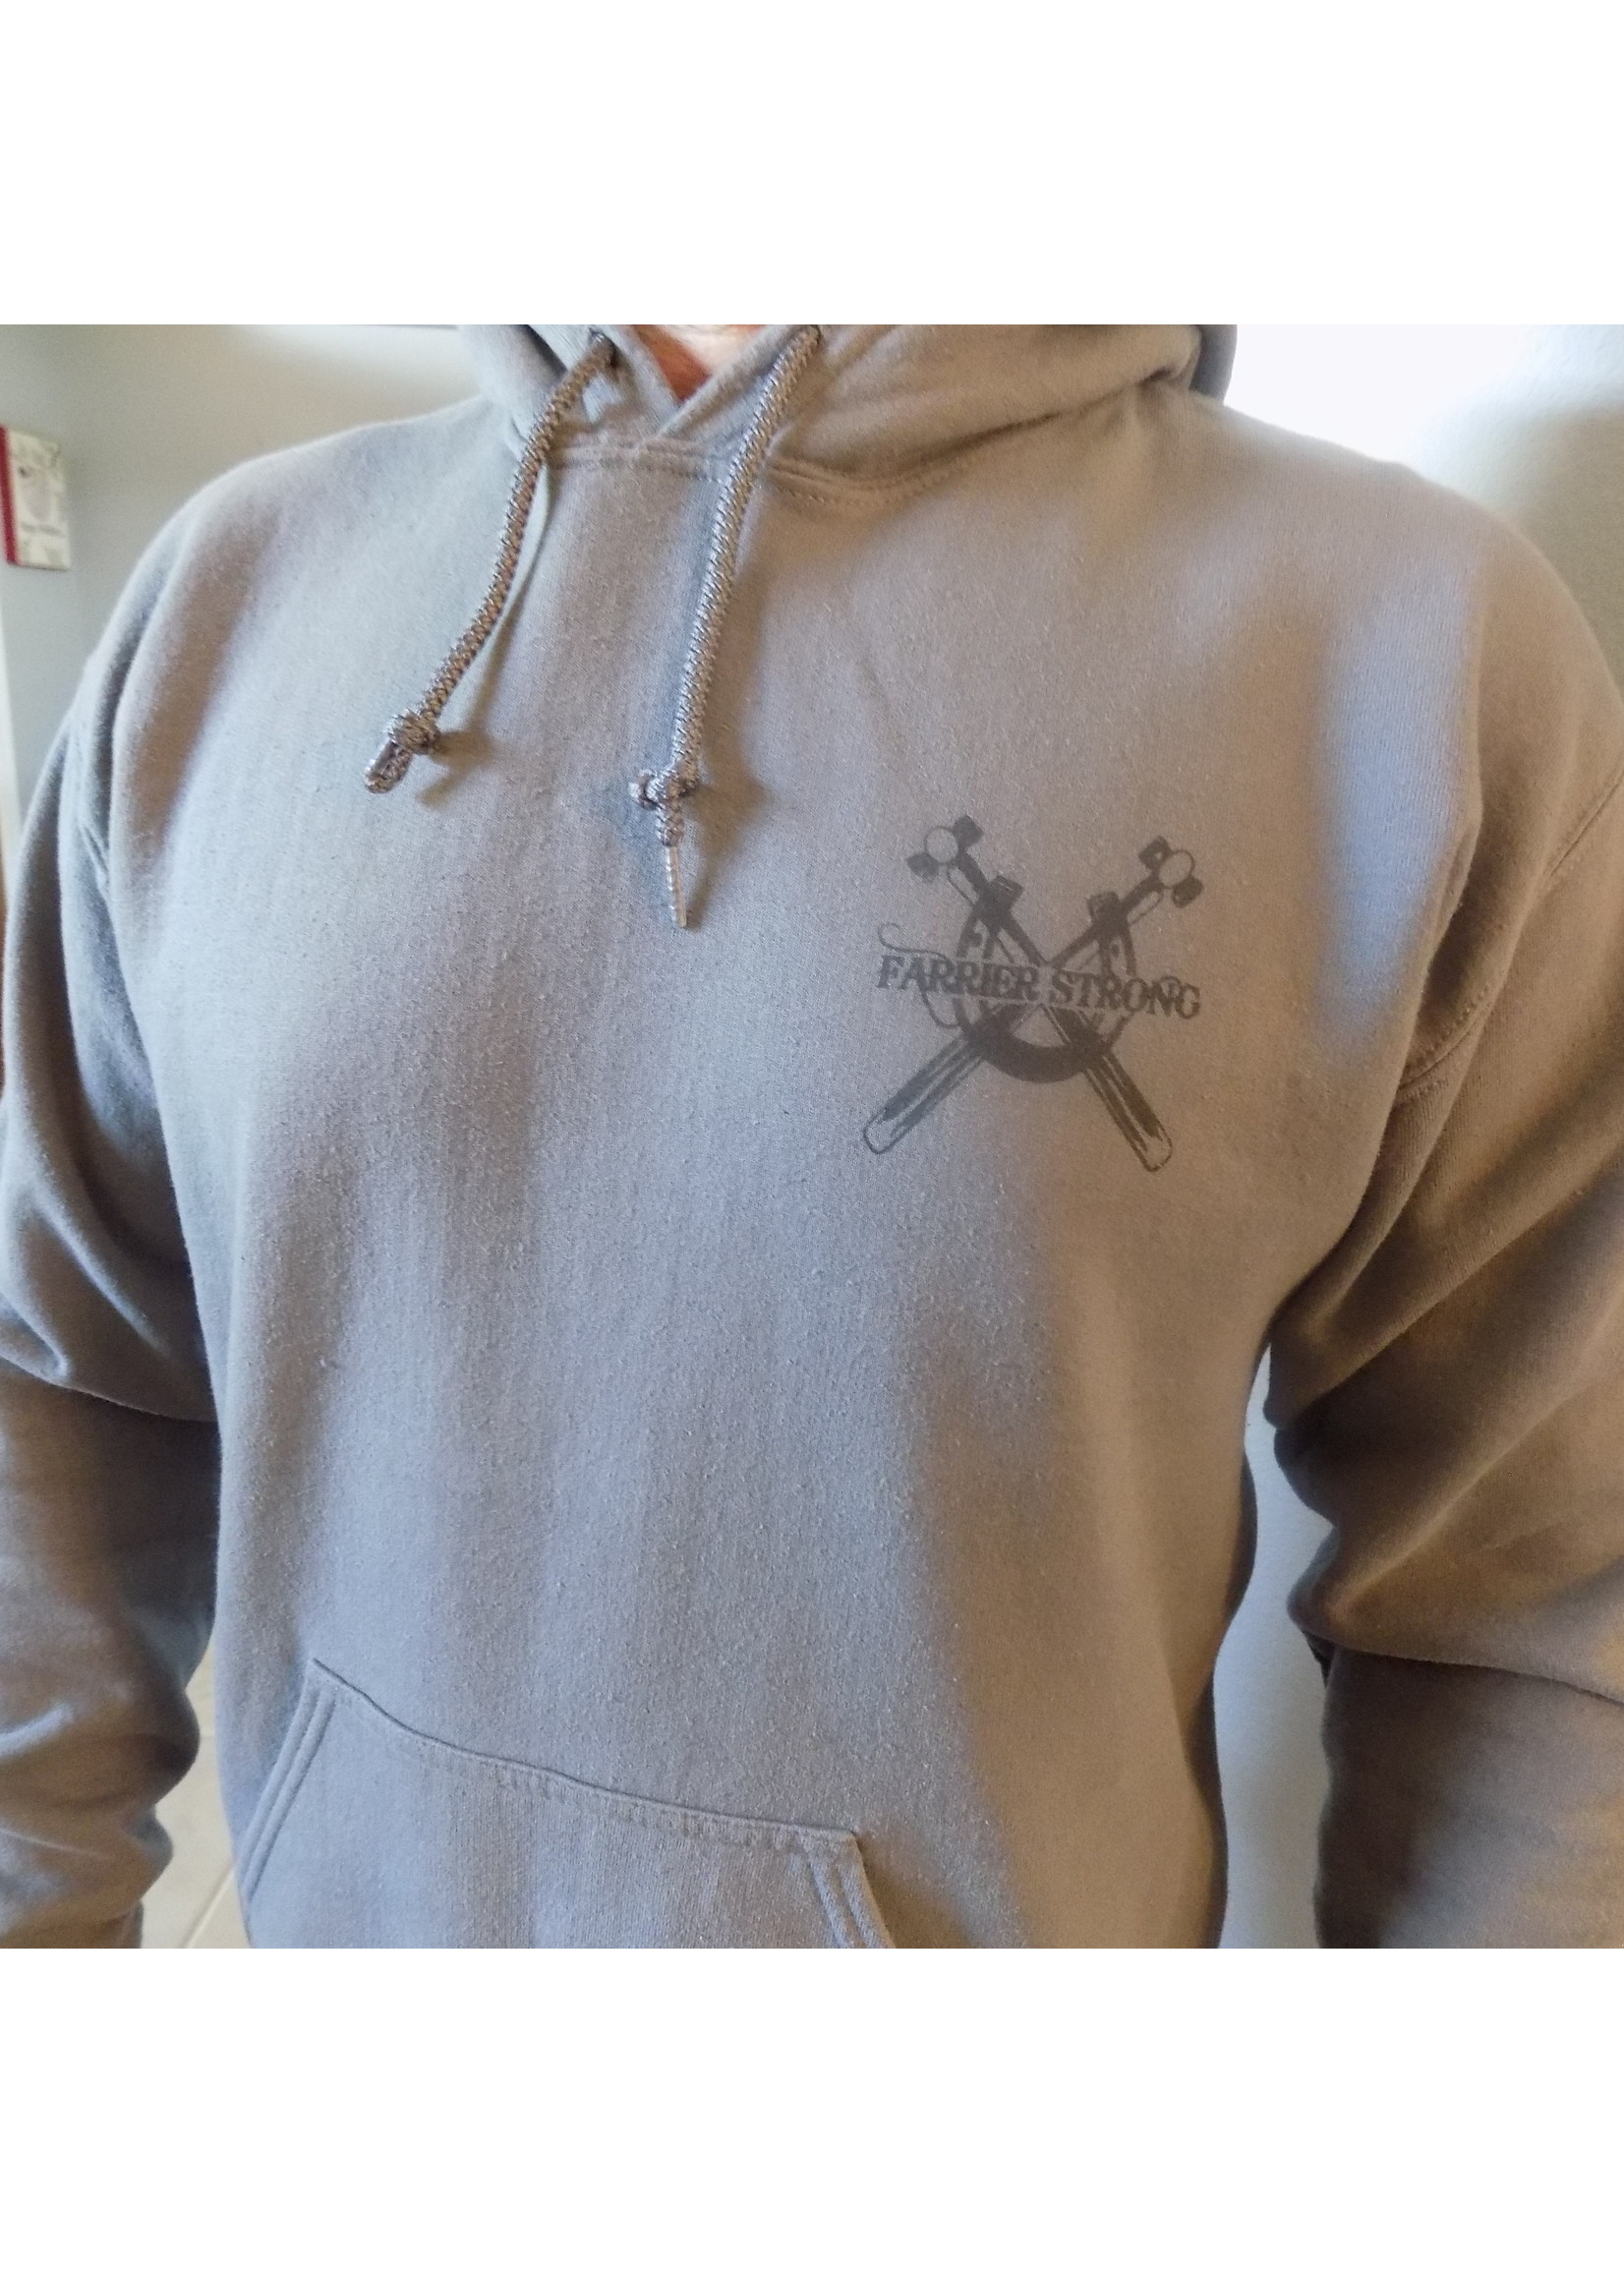 Farrier Strong Hoodie